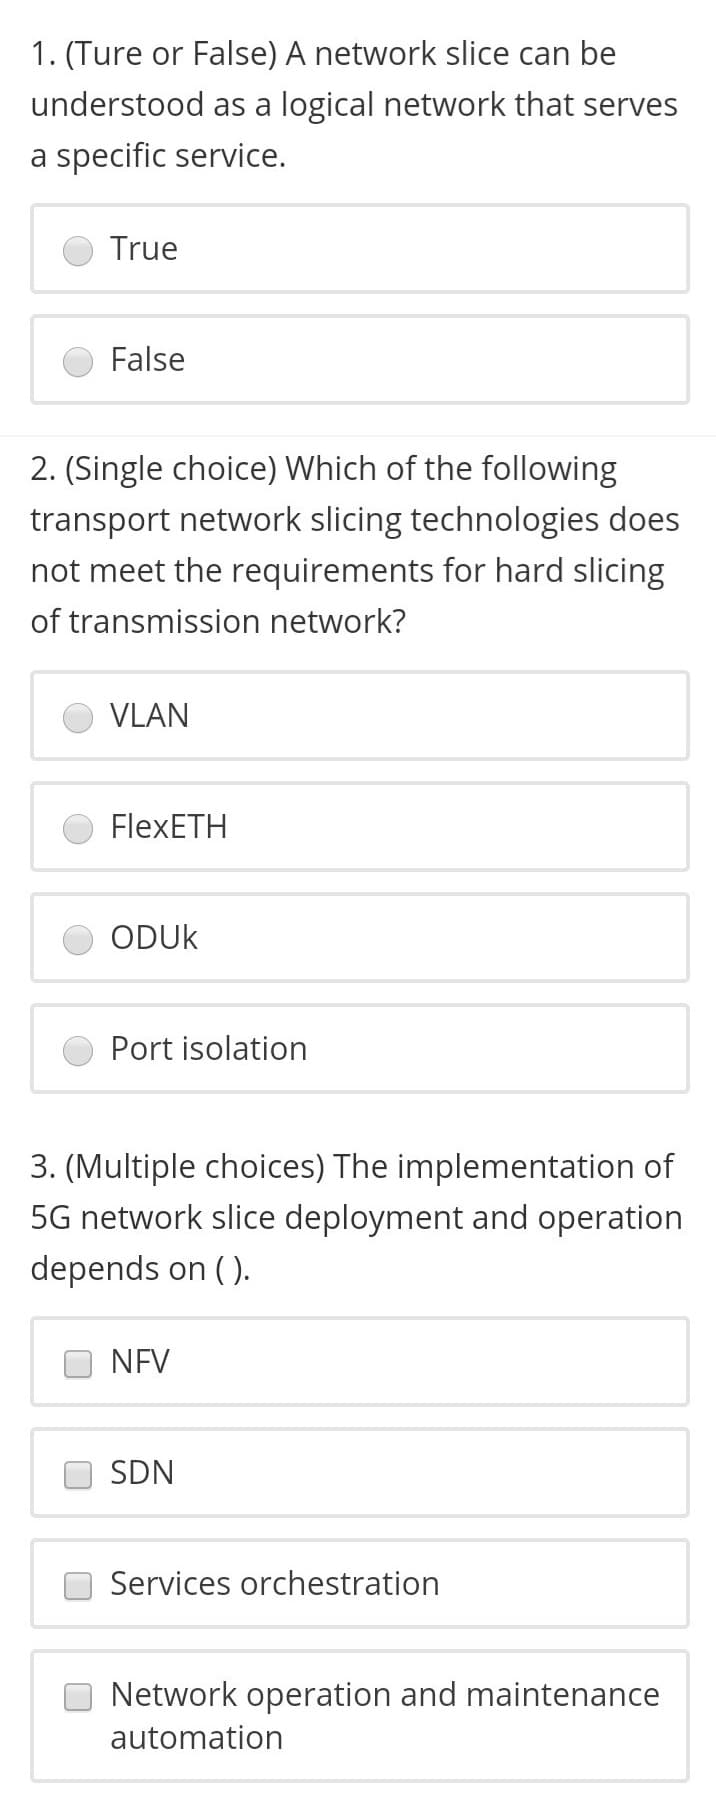 1. (Ture or False) A network slice can be
understood as a logical network that serves
a specific service.
True
False
2. (Single choice) Which of the following
transport network slicing technologies does
not meet the requirements for hard slicing
of transmission network?
VLAN
FlexETH
ODUK
Port isolation
3. (Multiple choices) The implementation of
5G network slice deployment and operation
depends on ( ).
NEV
SDN
Services orchestration
Network operation and maintenance
automation
